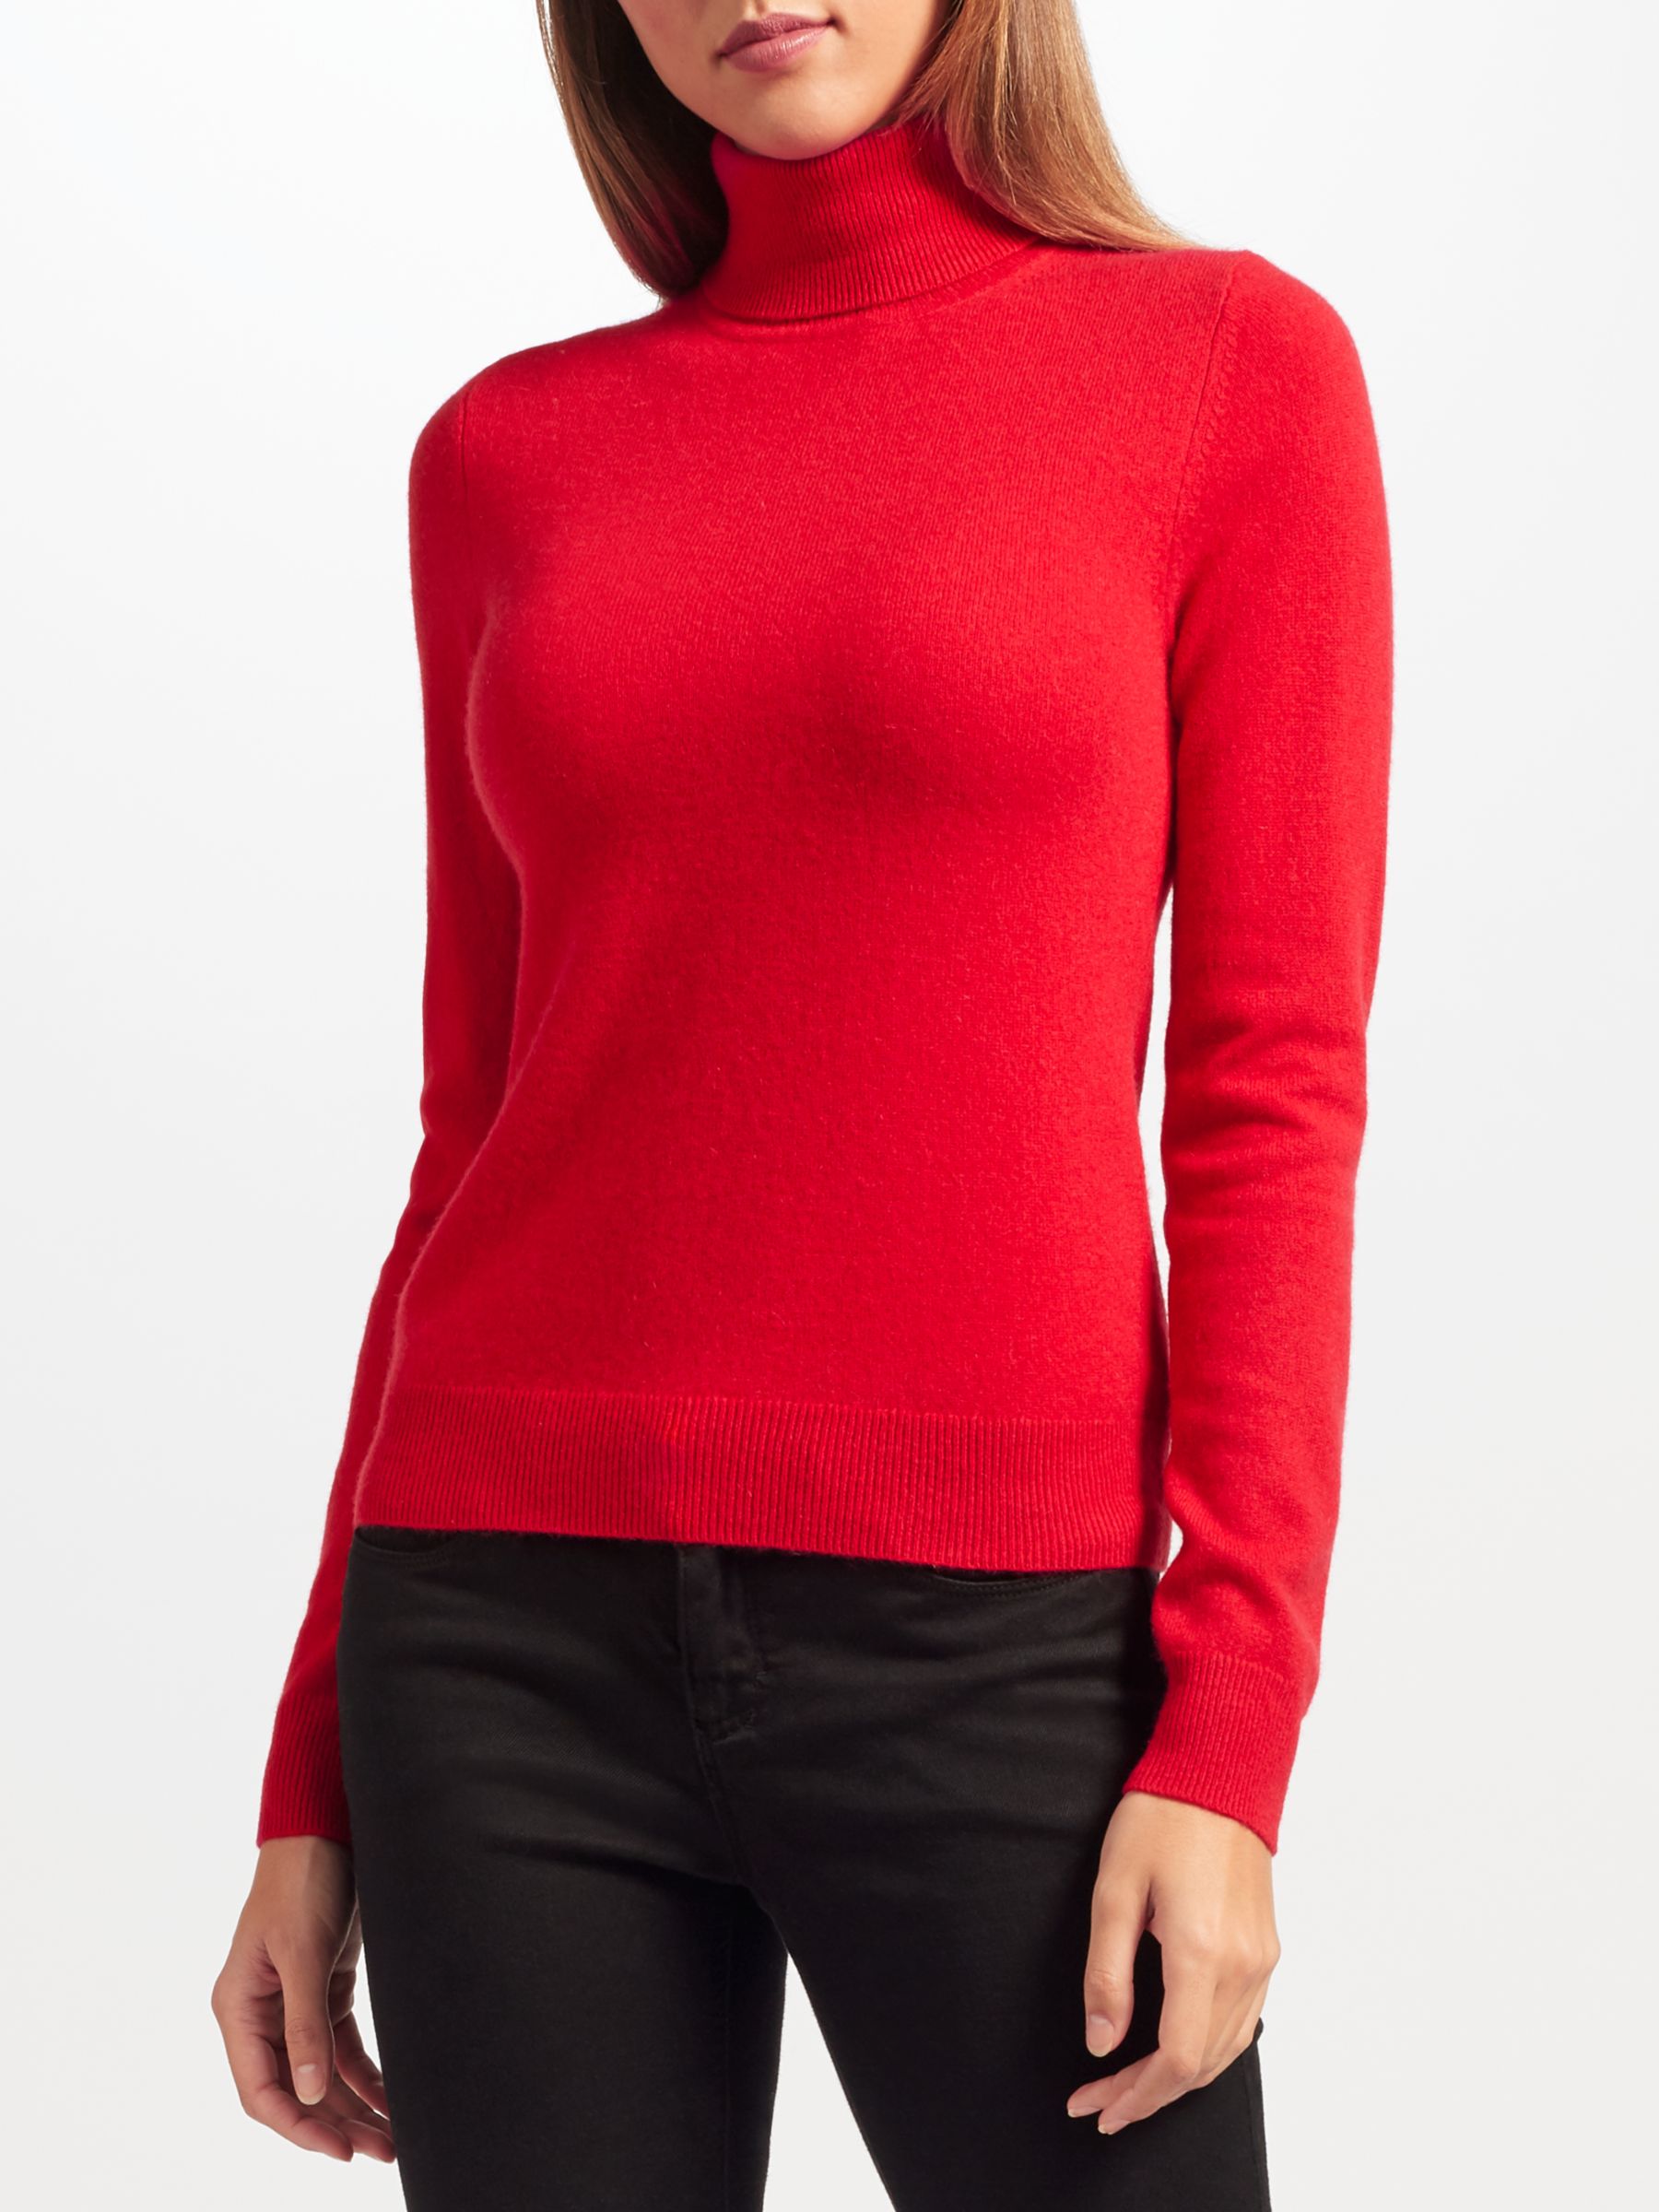 John Lewis & Partners Cashmere Roll Neck Jumper, Rich Red, 8